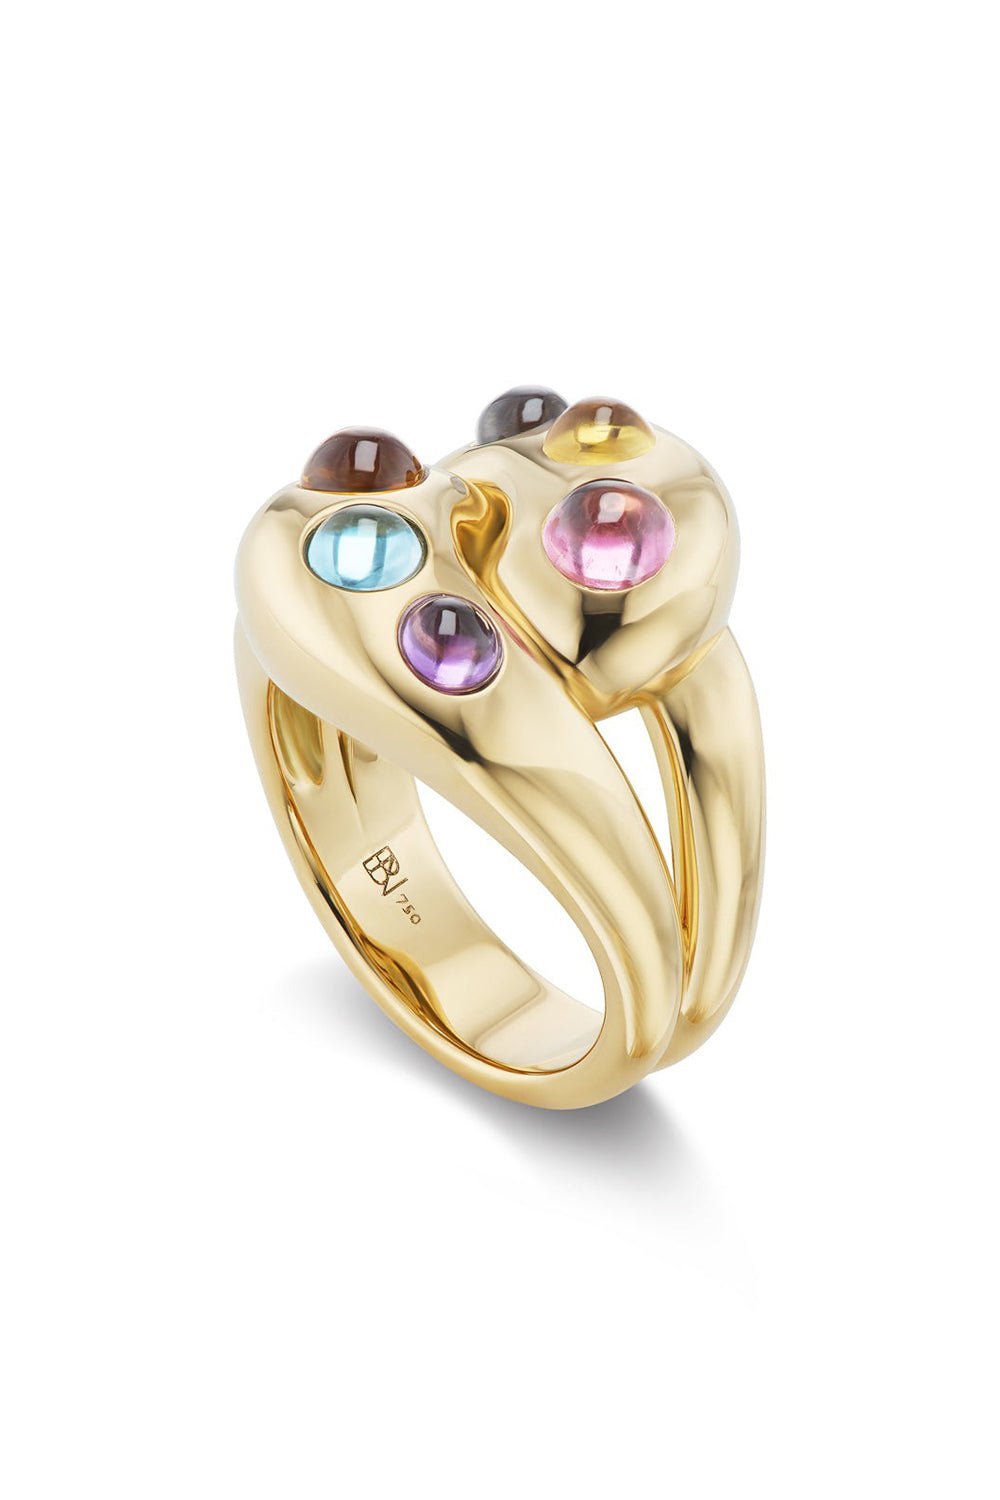 BRENT NEALE-6 Rainbow Cabochon Knot Ring-YELLOW GOLD